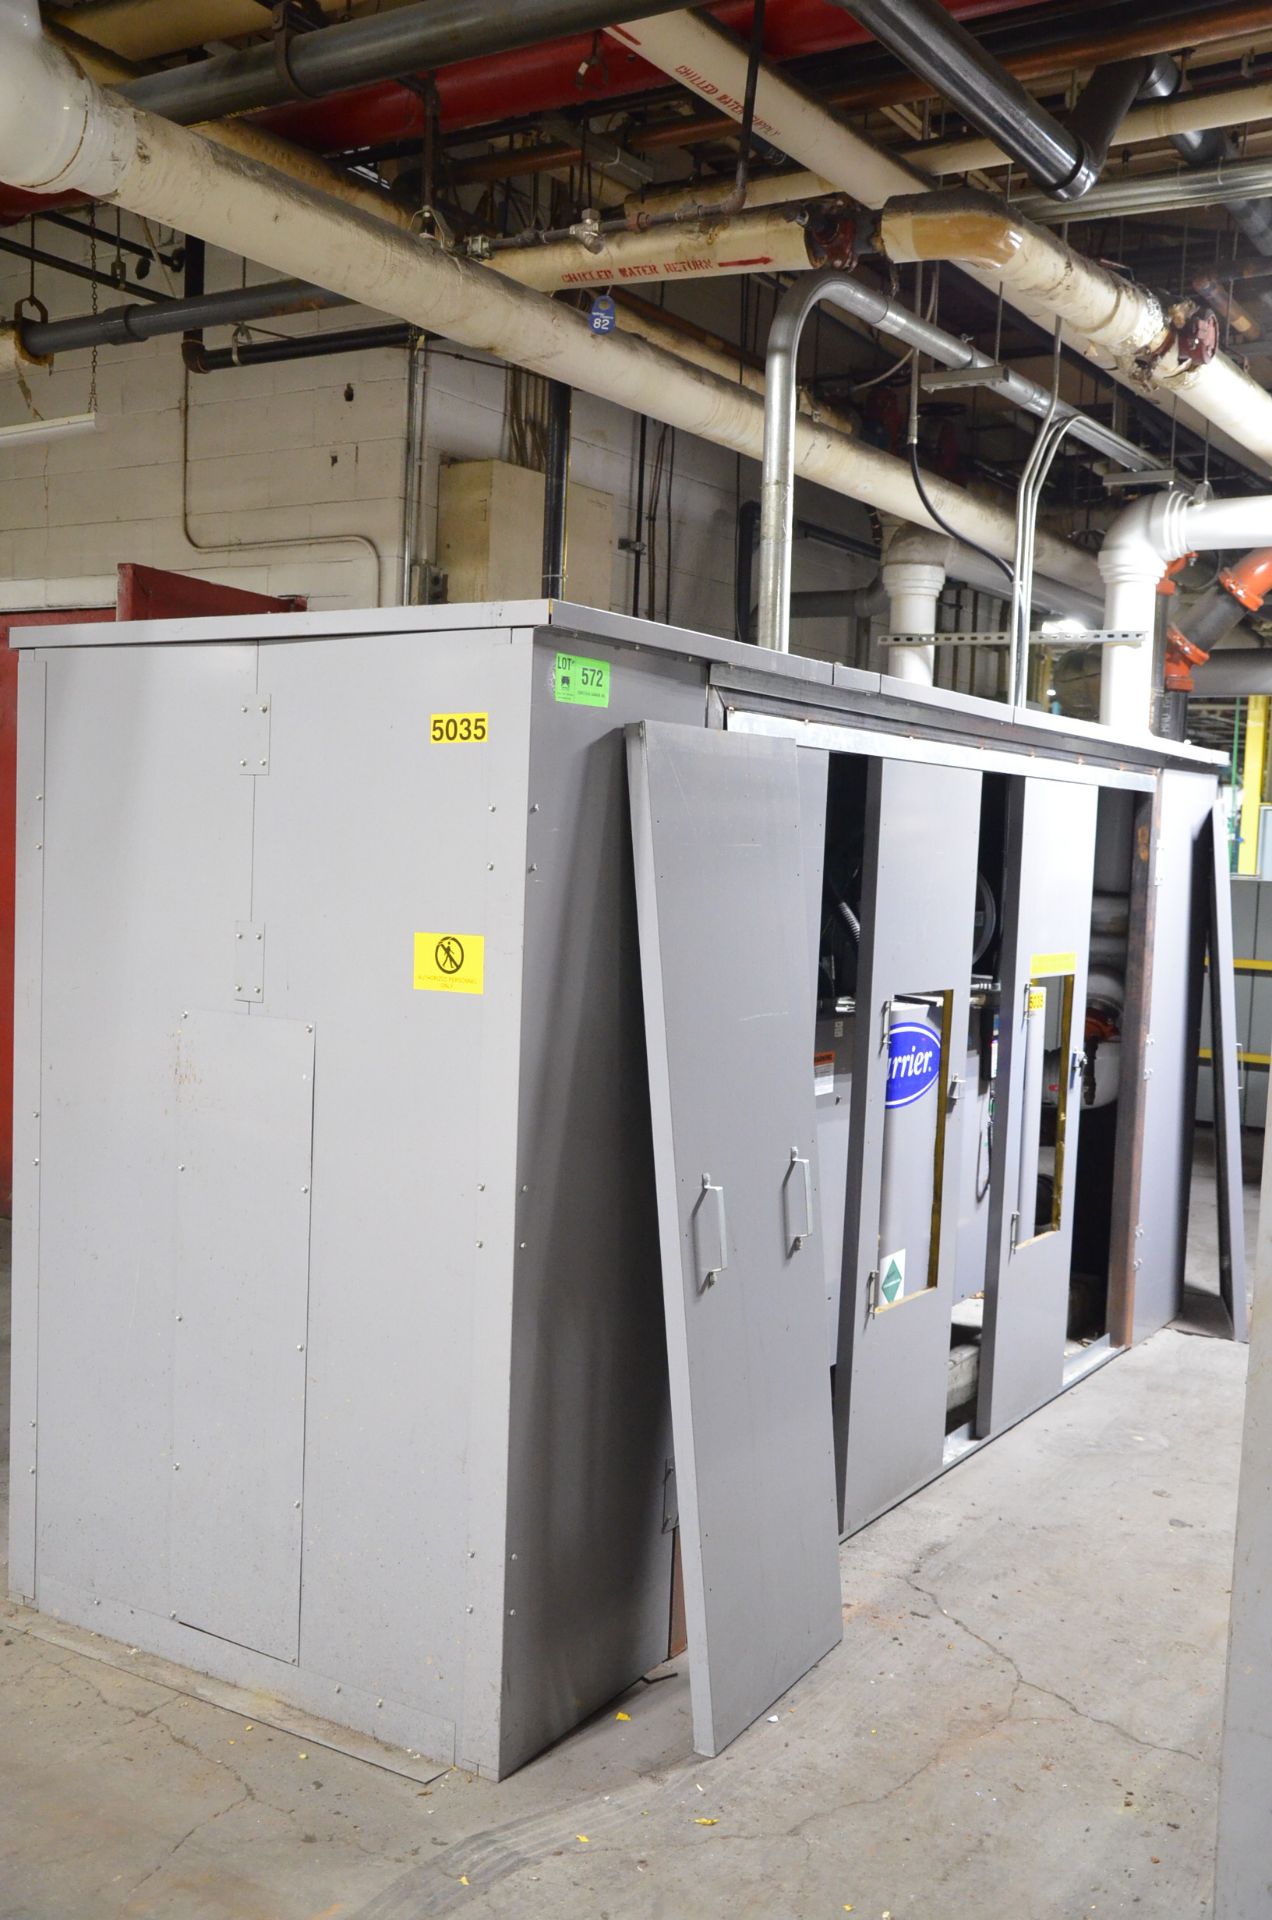 CARRIER 30HXC136RY-671KA REFRIGERATED LIQUID CHILLER, S/N 1114Q21736 [RIGGING FEE FOR LOT #572 - $